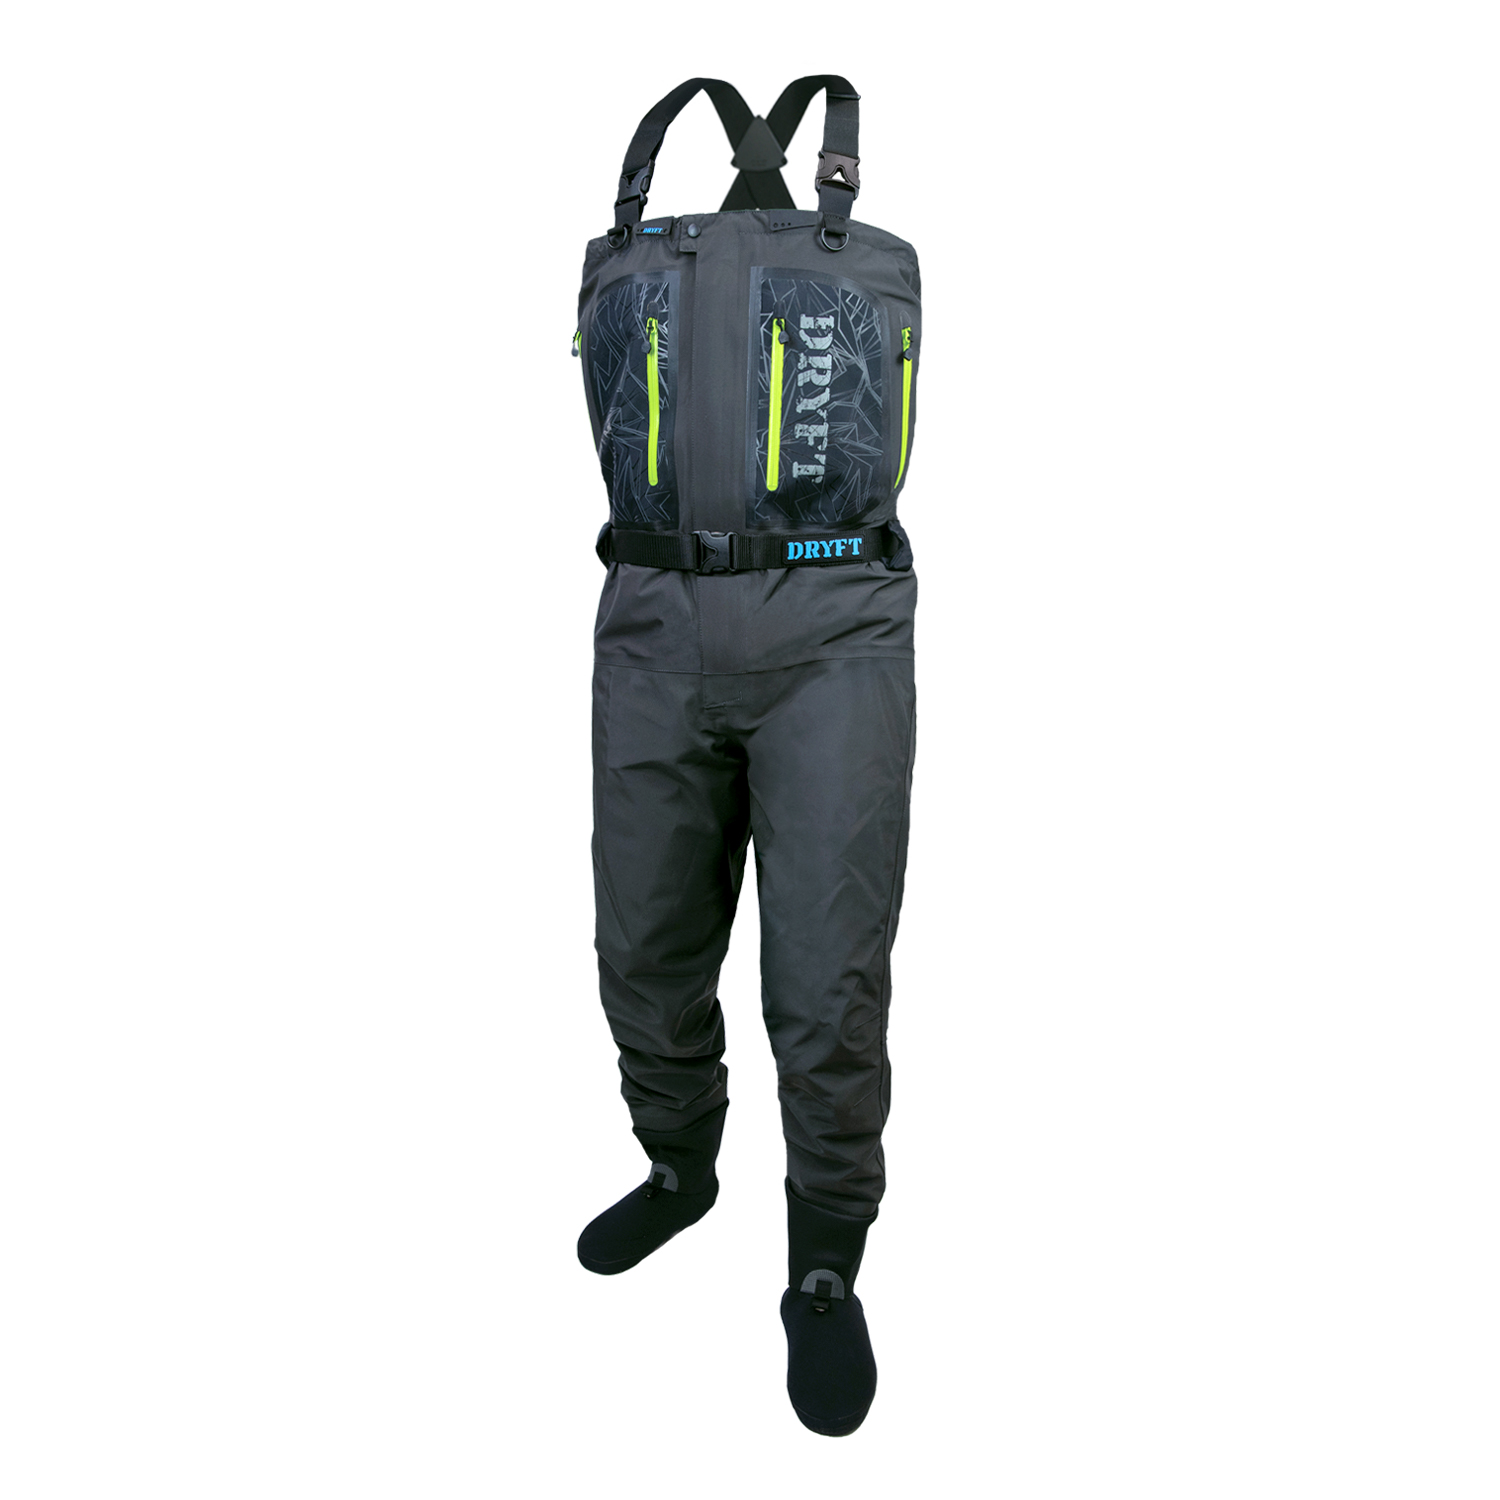 Session Women's Waist Waders - DRYFT™ Fishing Waders